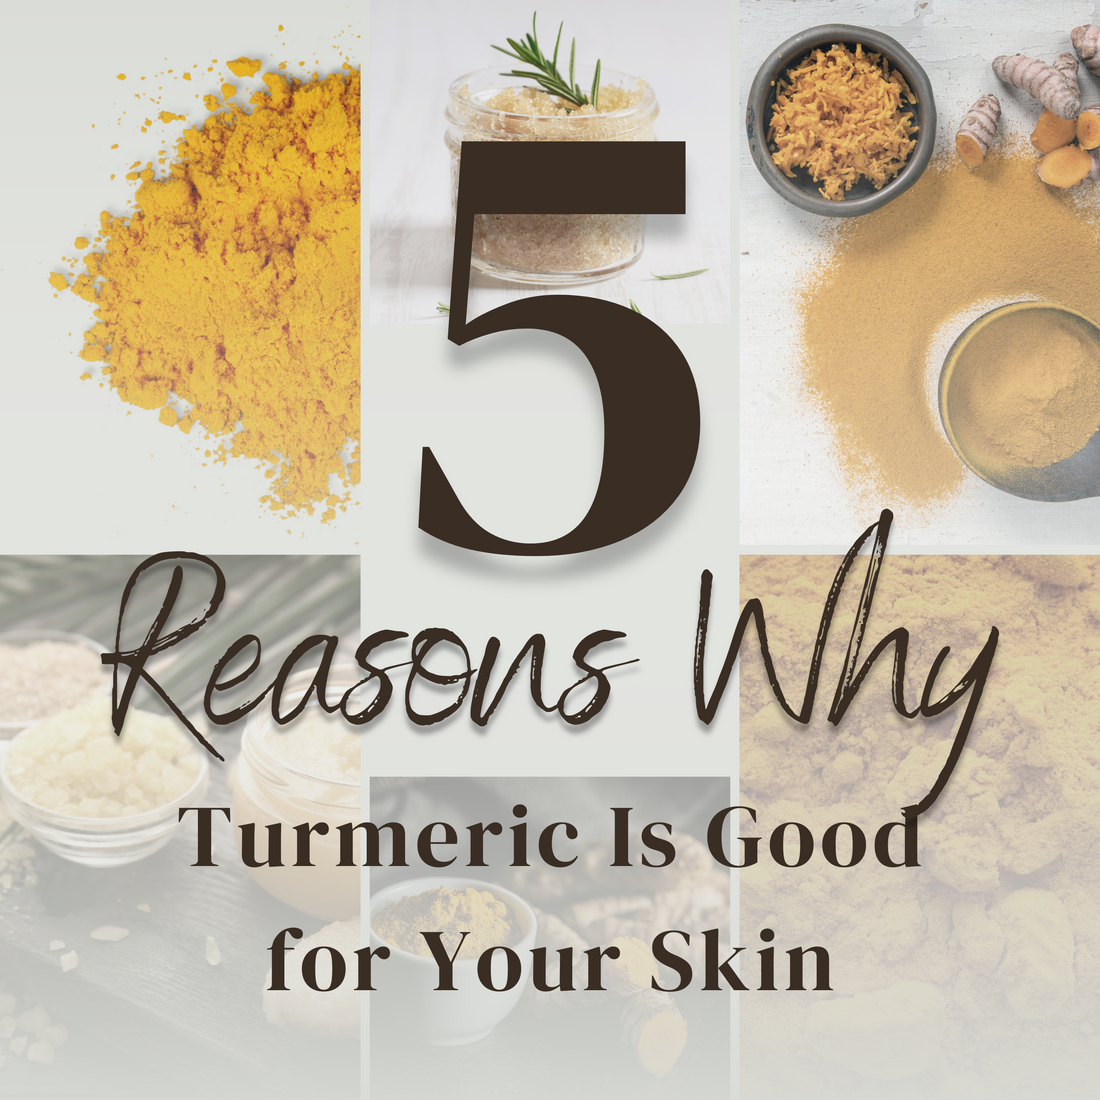 5 Reasons Why Turmeric Is Good for Your Skin